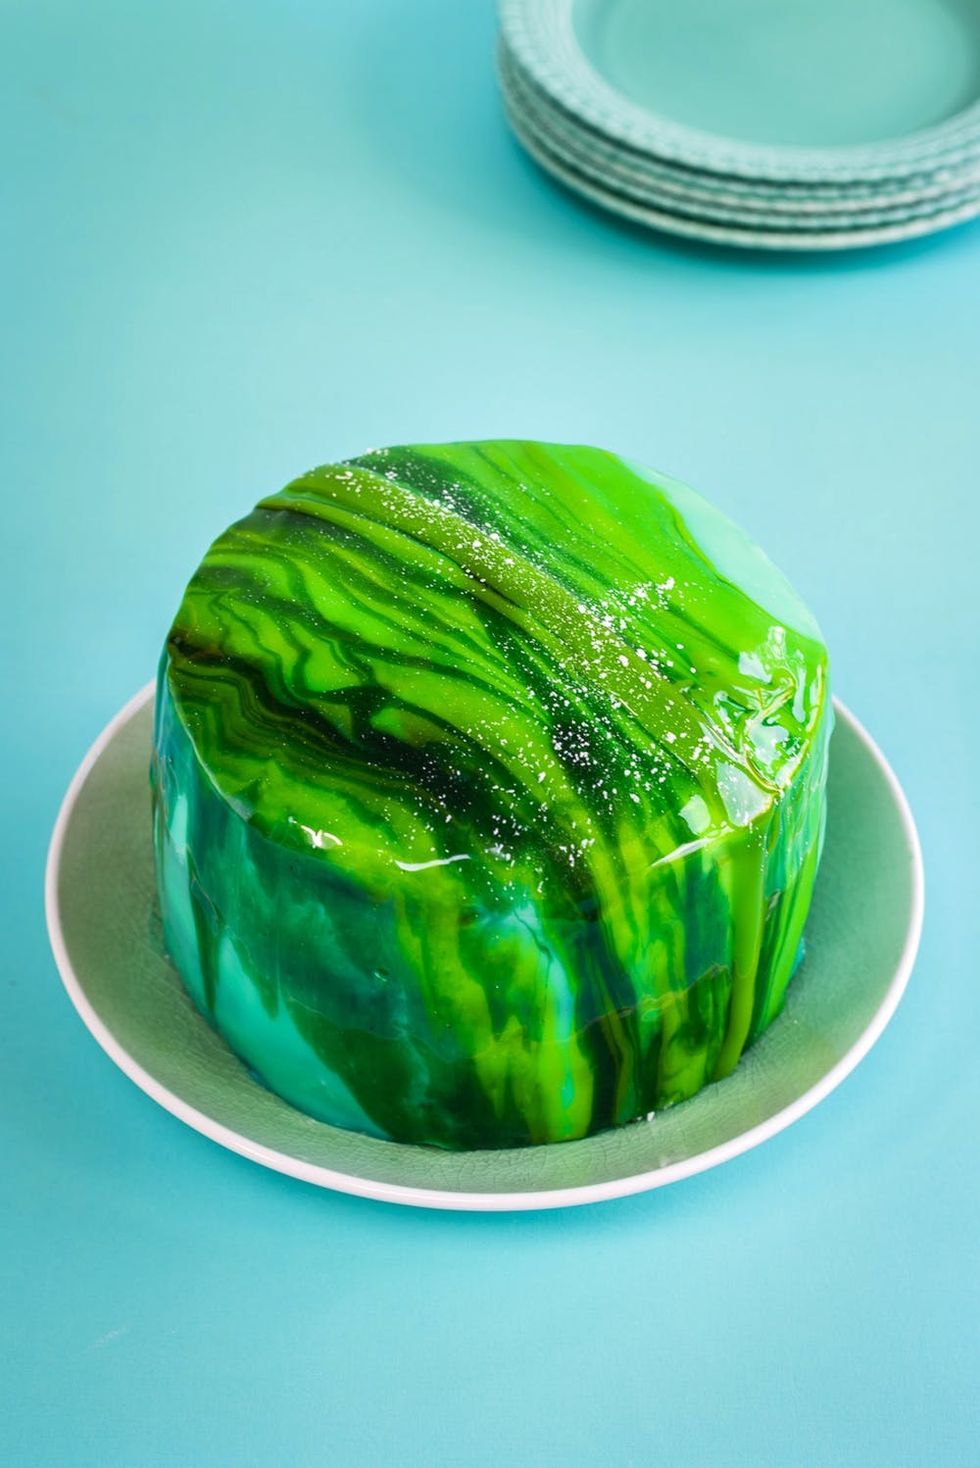 This St Patrick's Day ombr\u00e9 cake with mirror glaze will make even the most ardent leprechaun green with envy!